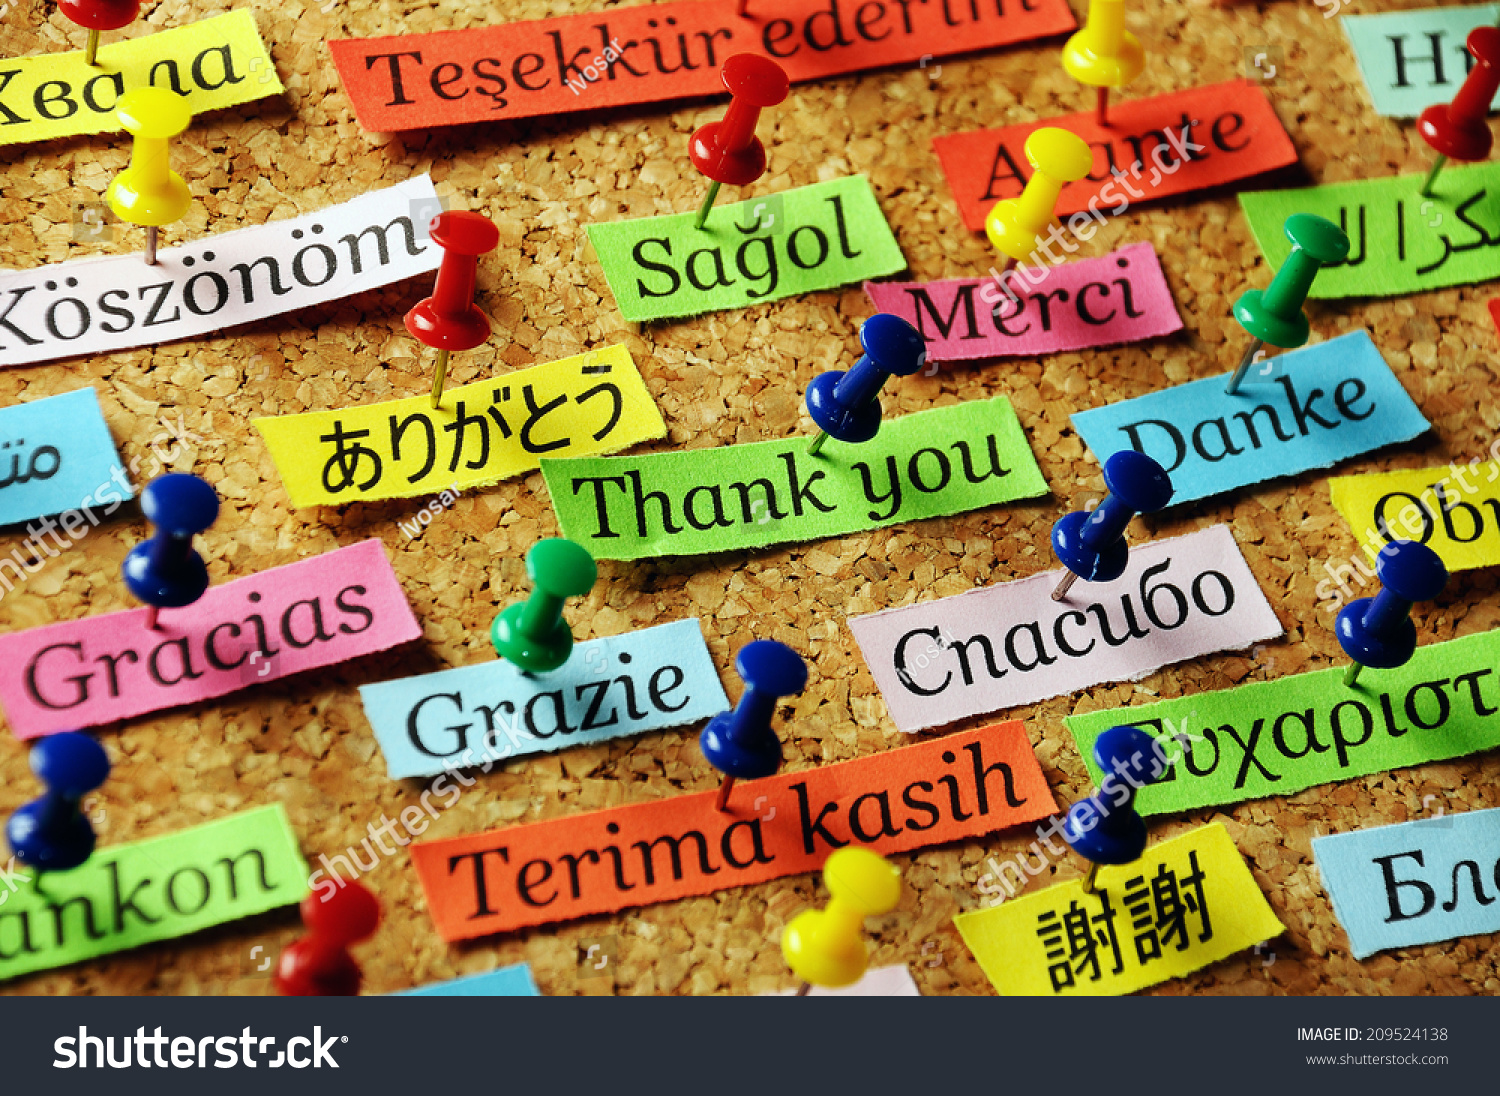 thank you clipart in different languages - photo #44